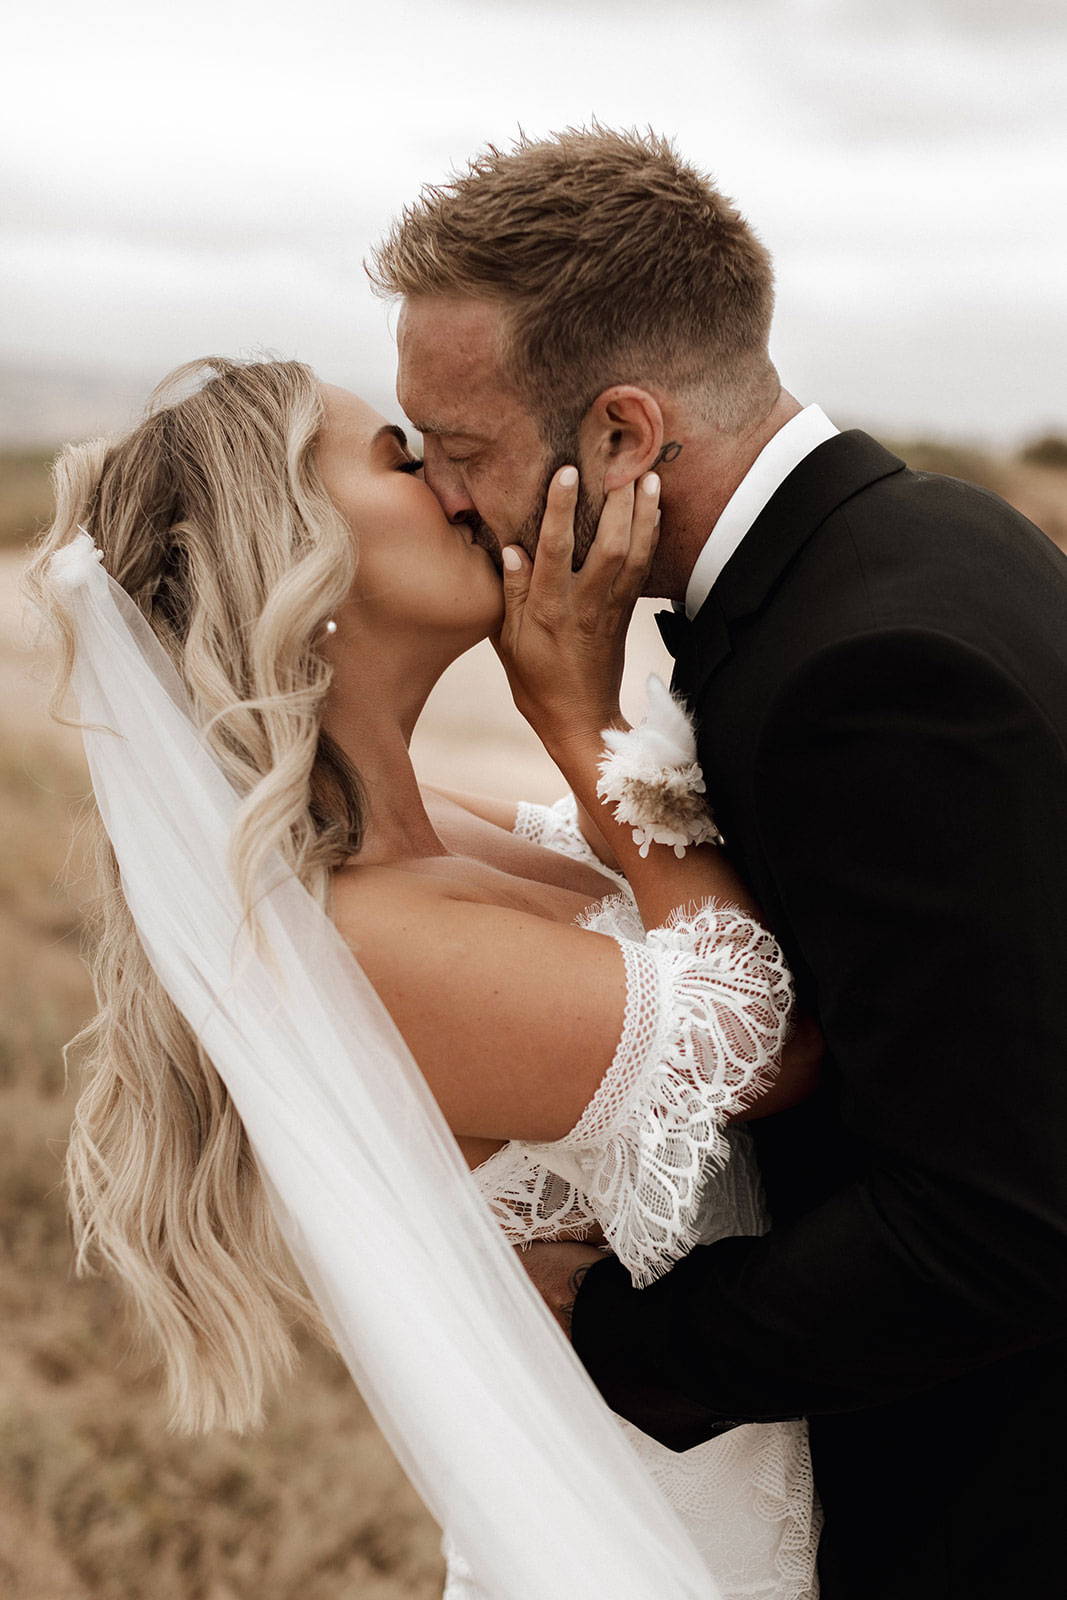 Bride and groom sharing a kiss